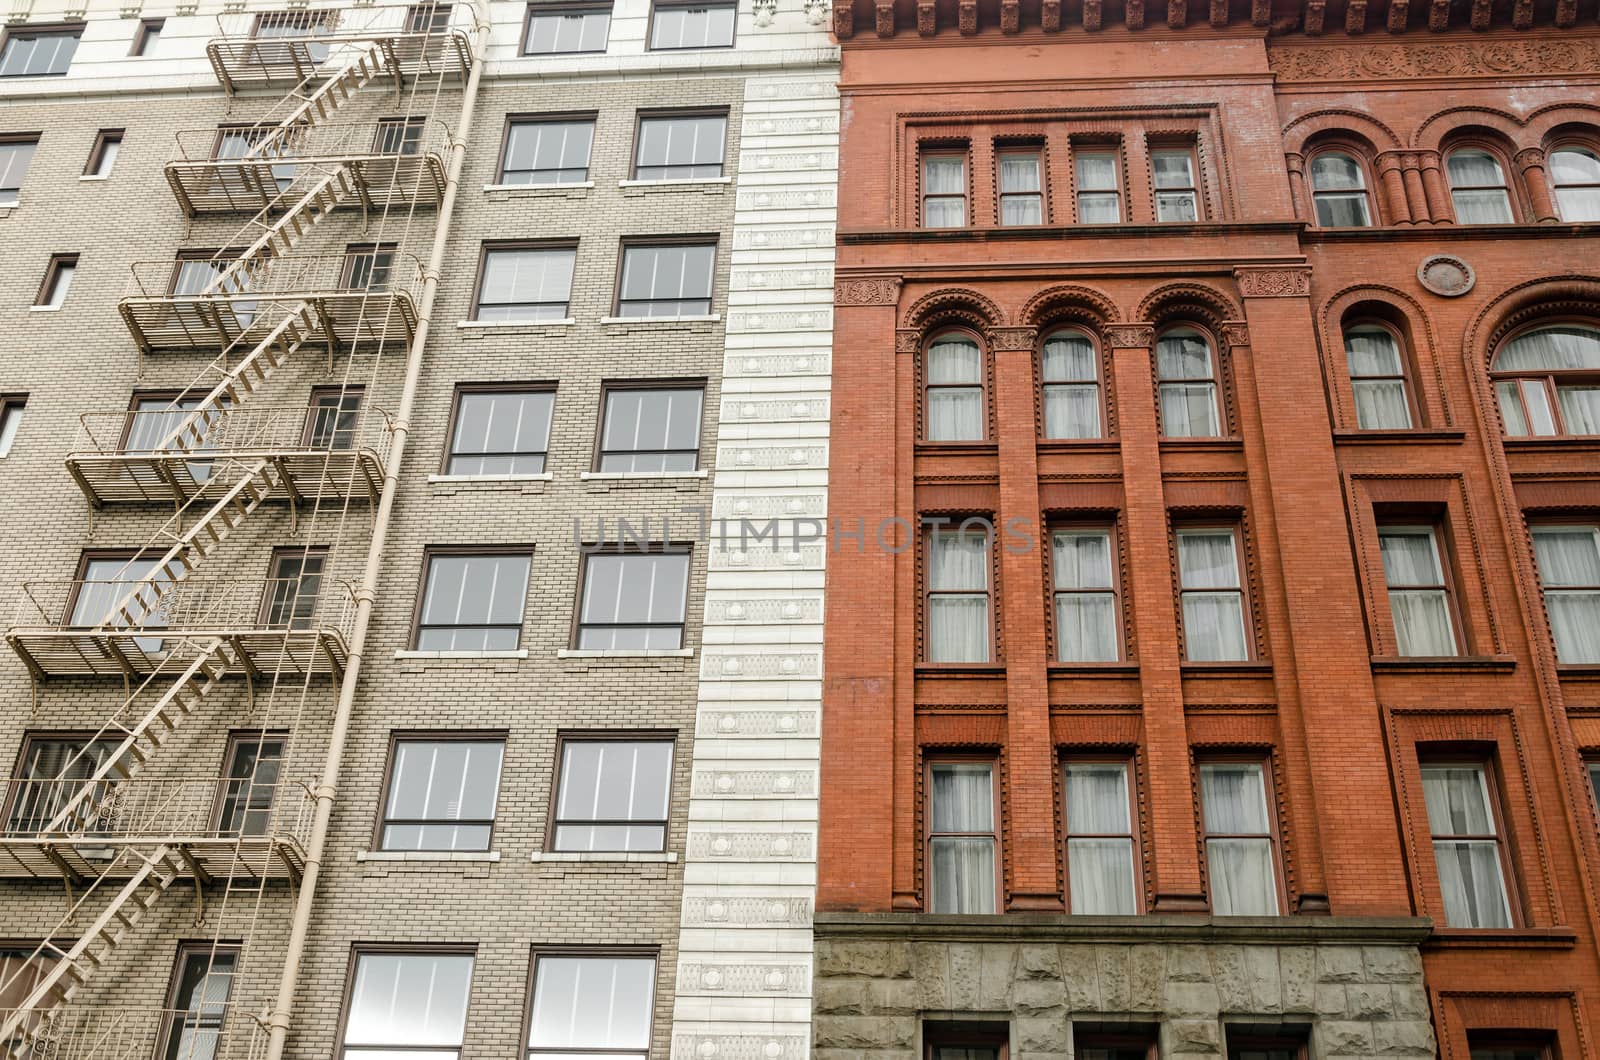 The facades of two different old different color brick buildings in downtown Portland, Oregon